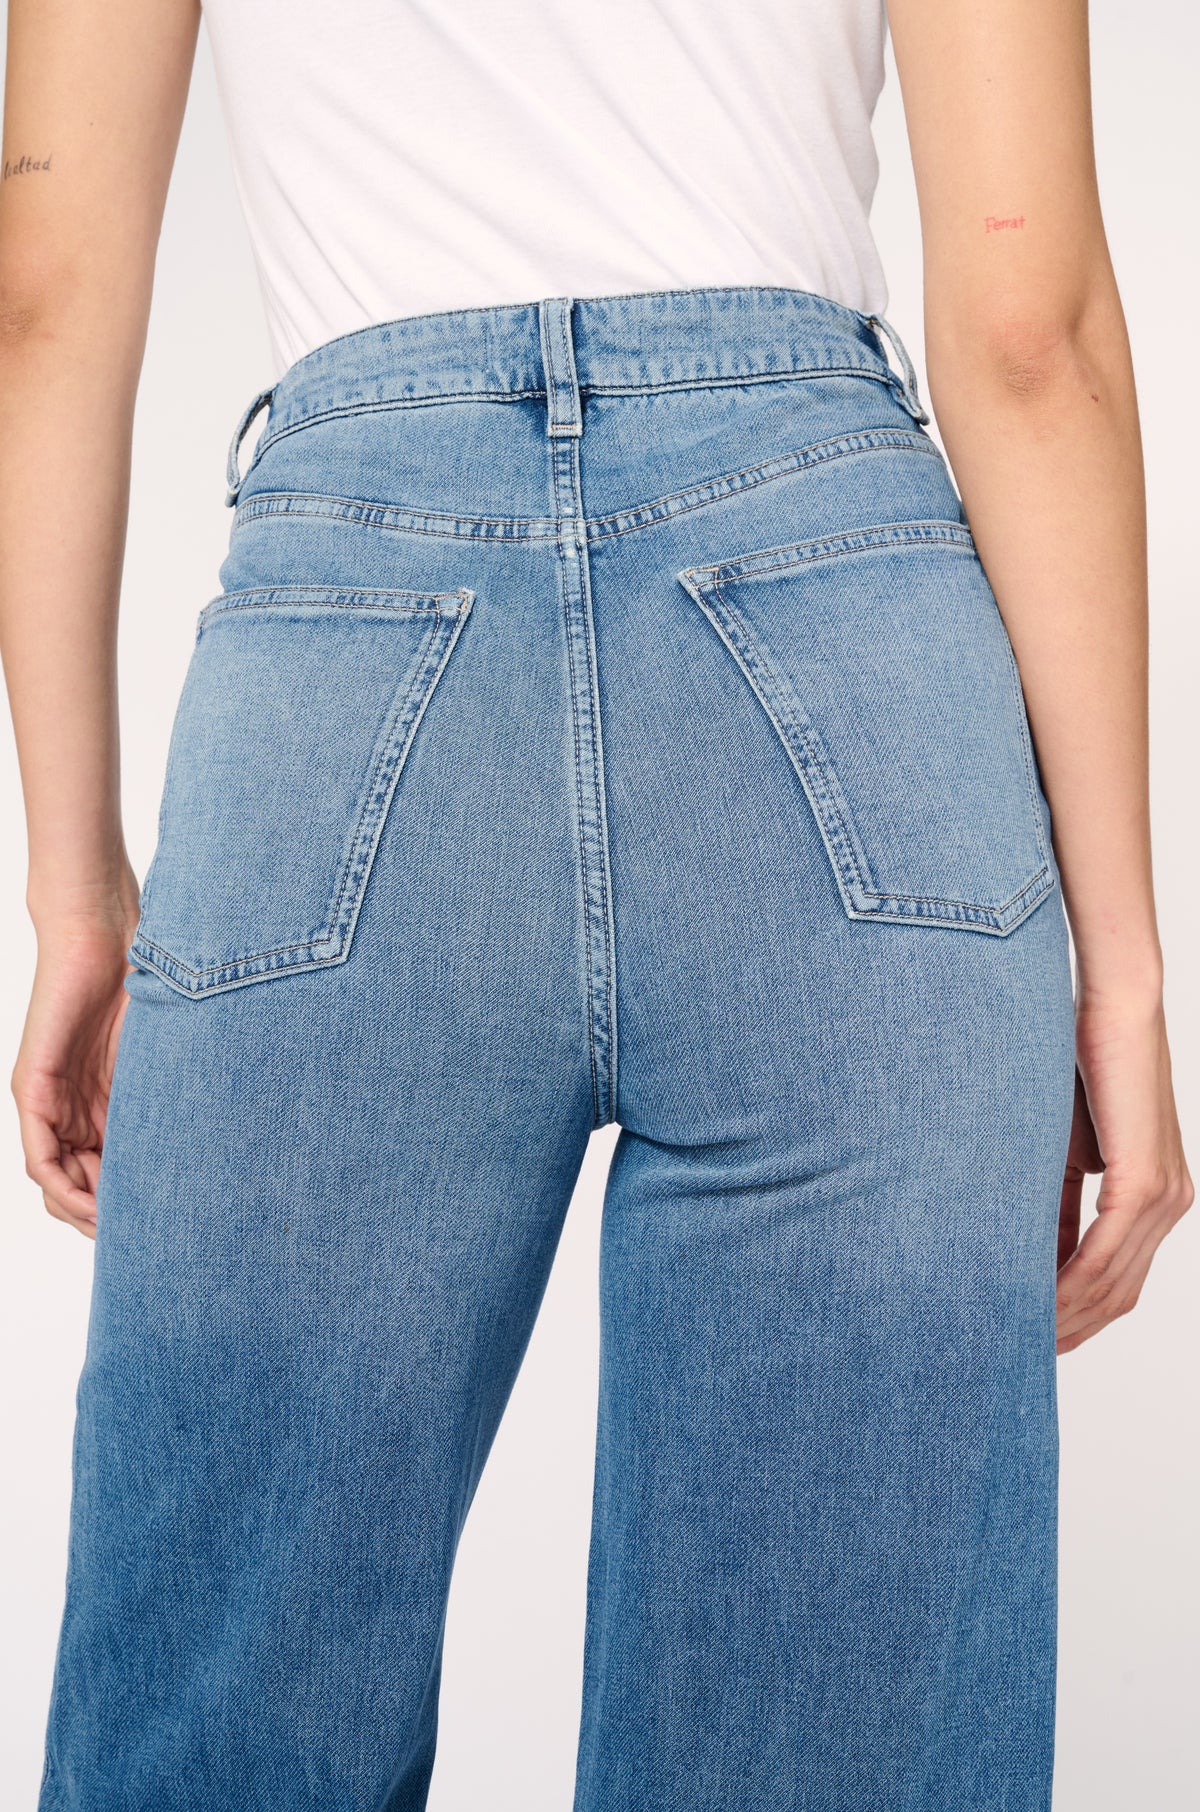 HOU - RELAXED WIDE LEG JEANS | WILD WEST